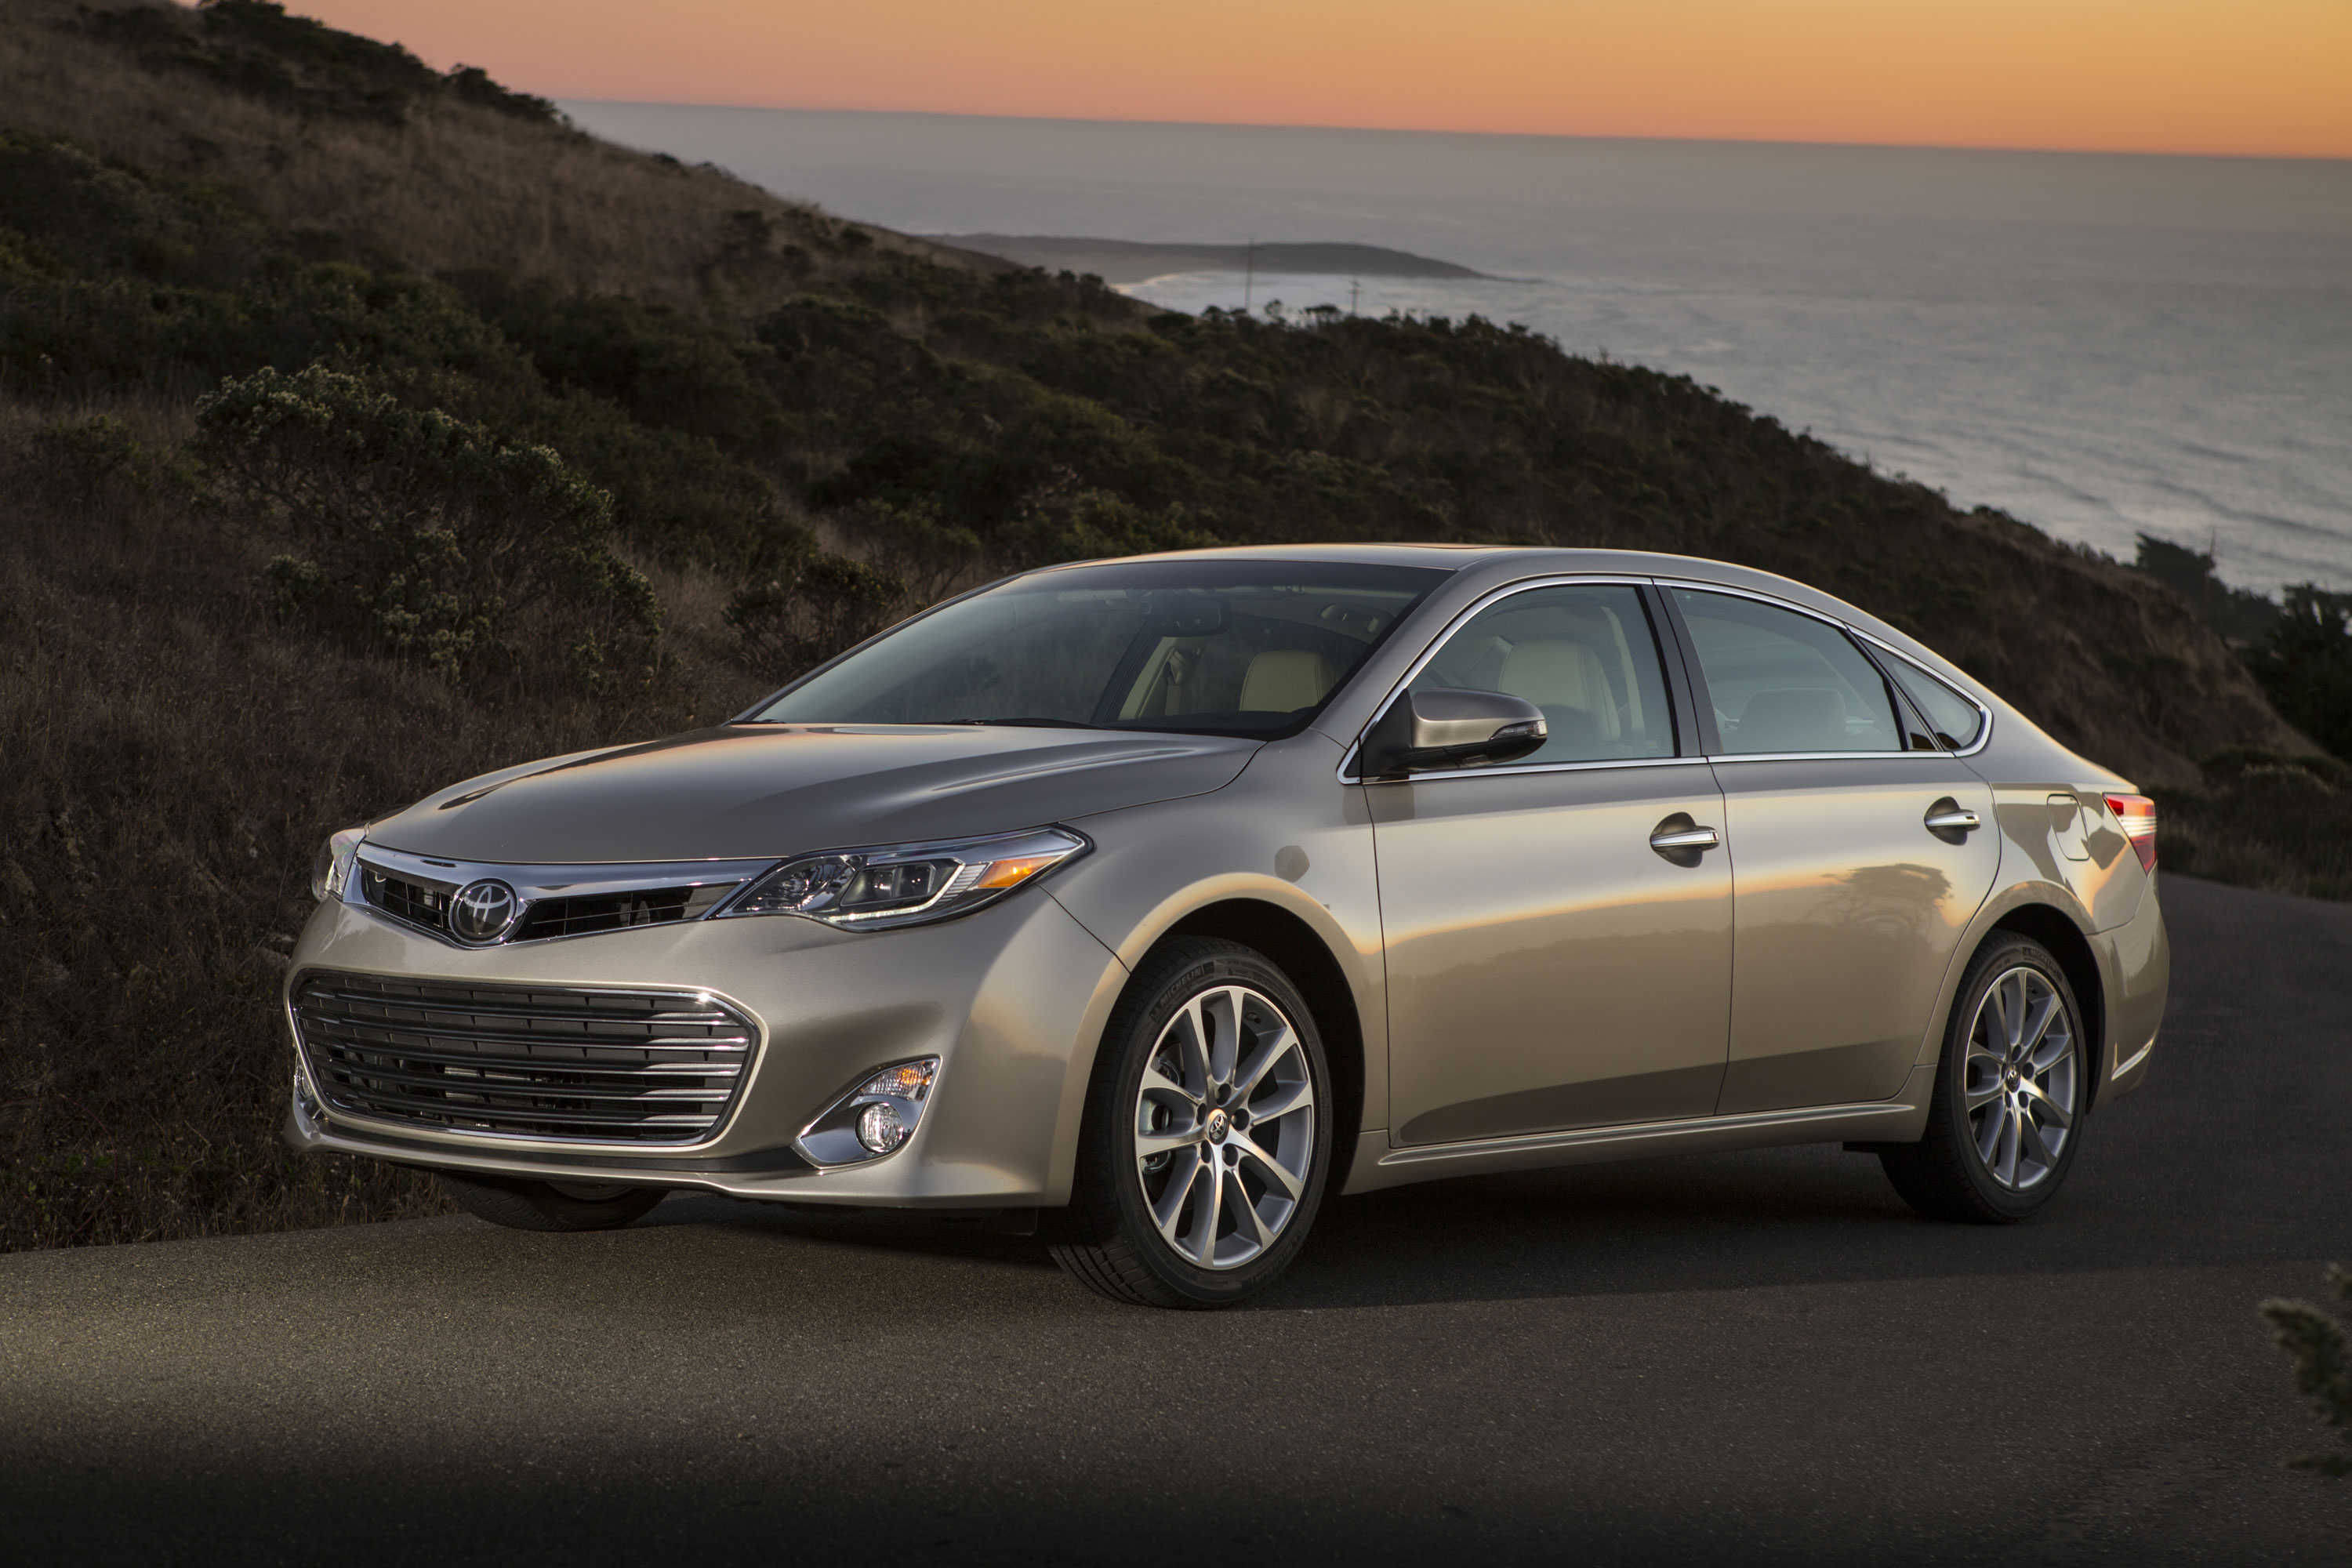 Amazing Toyota Avalon Pictures & Backgrounds